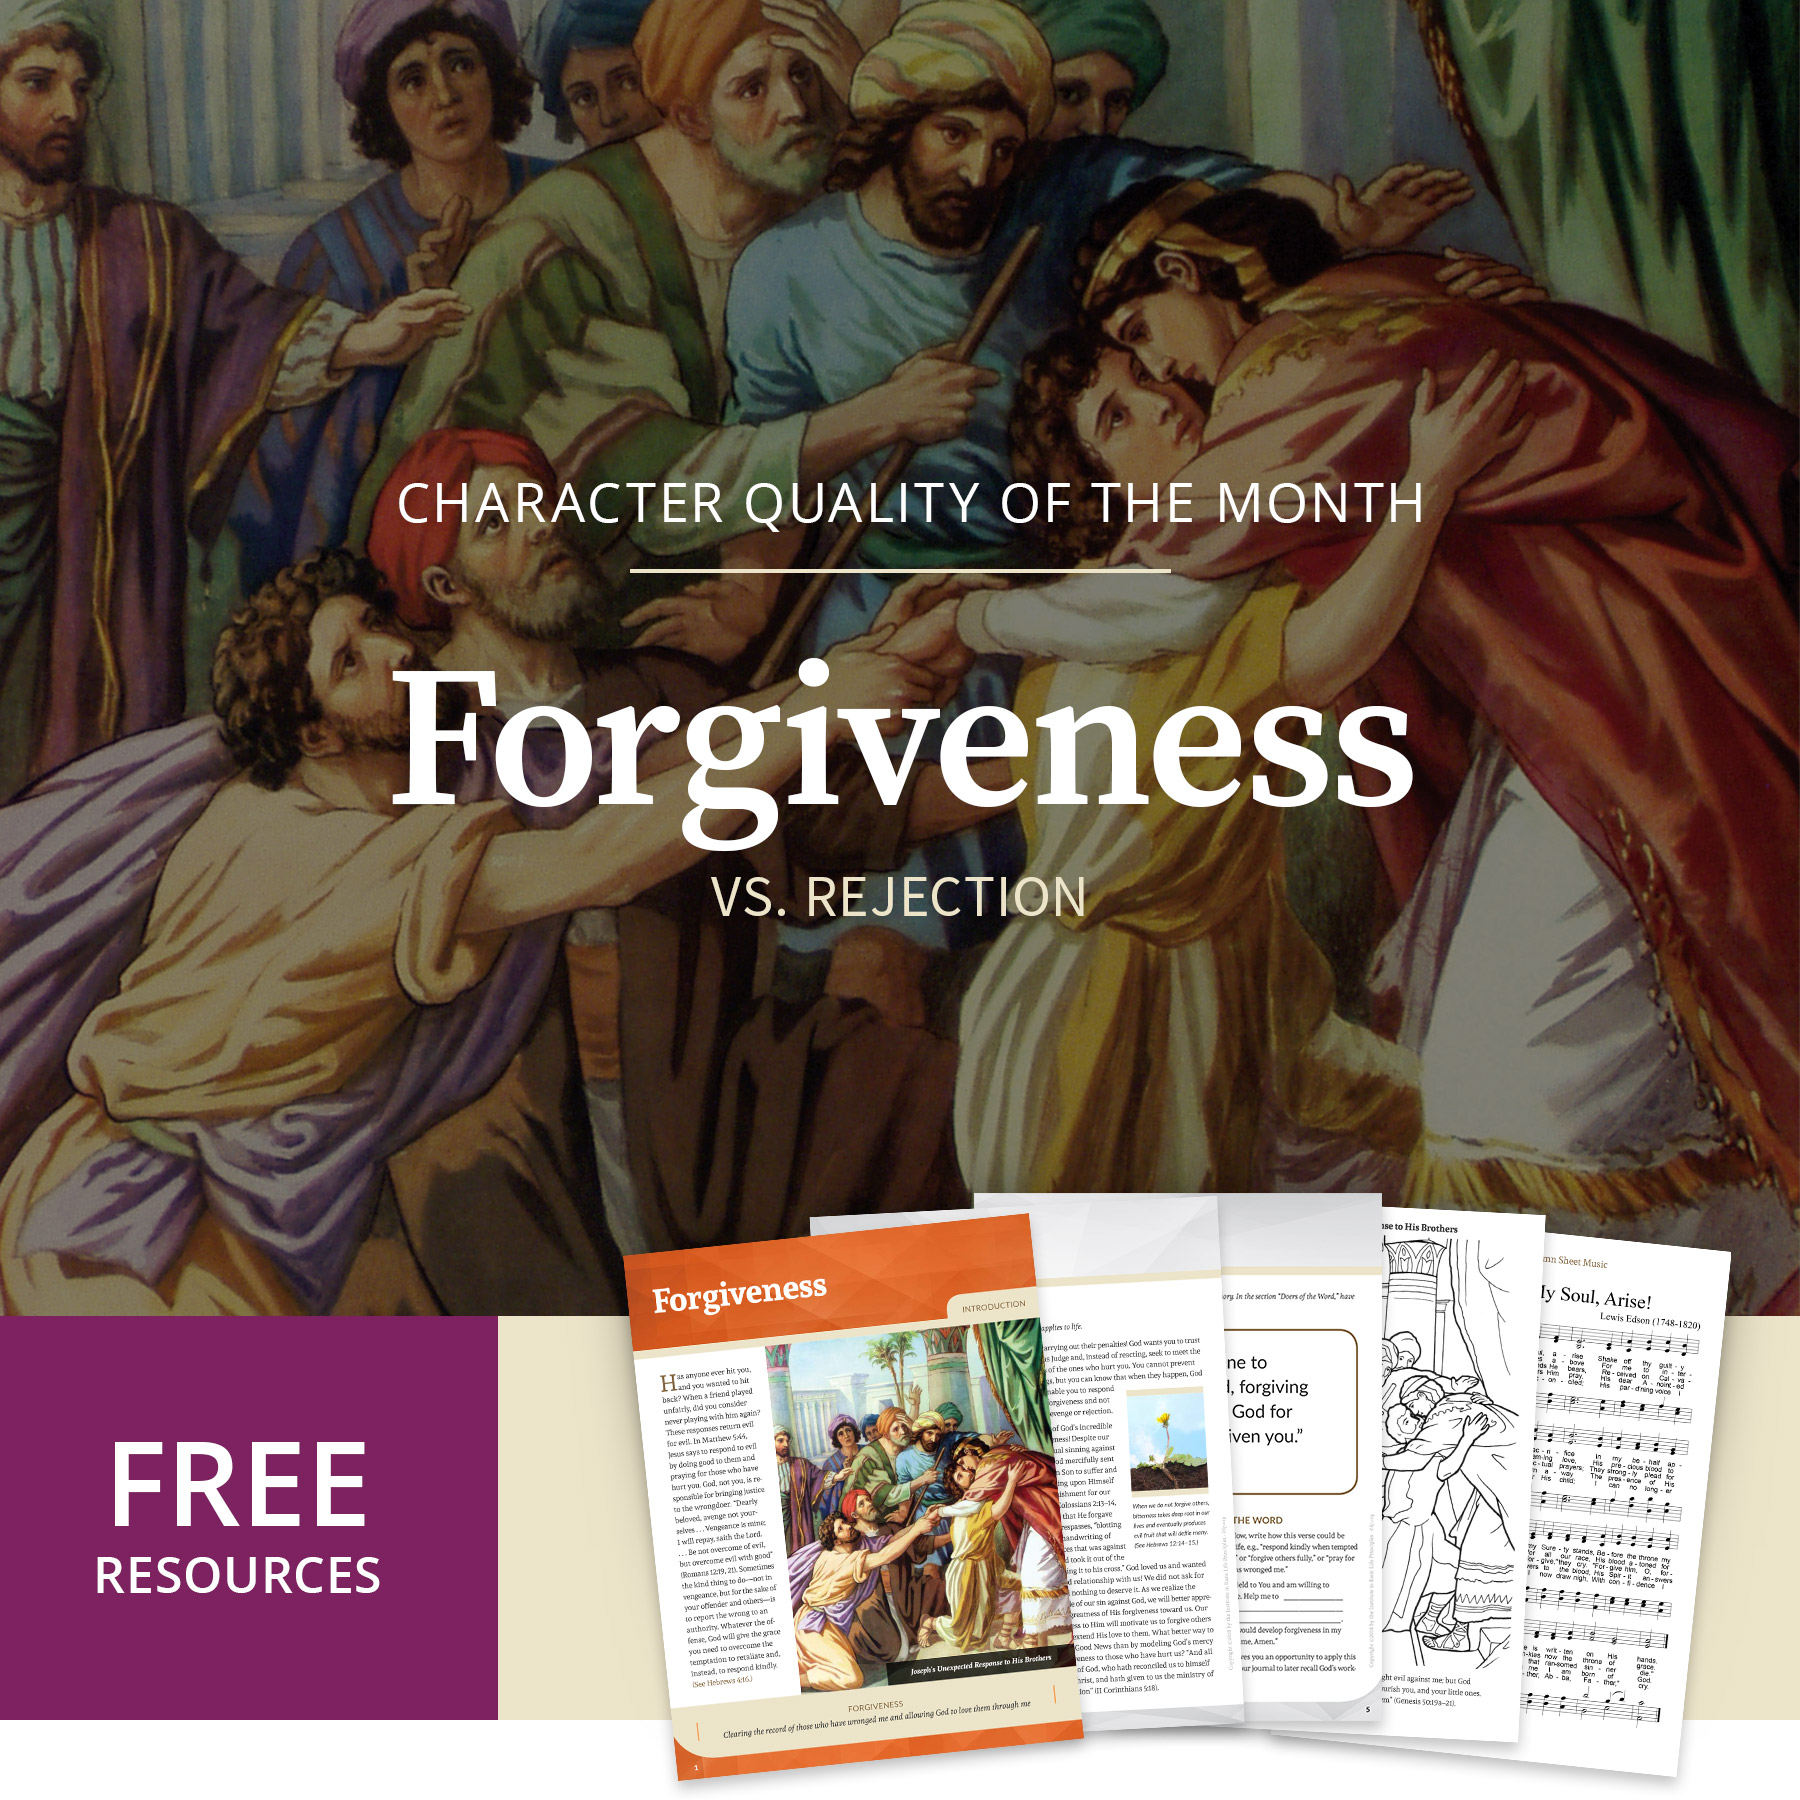 Forgiveness Free Resources for February 2022